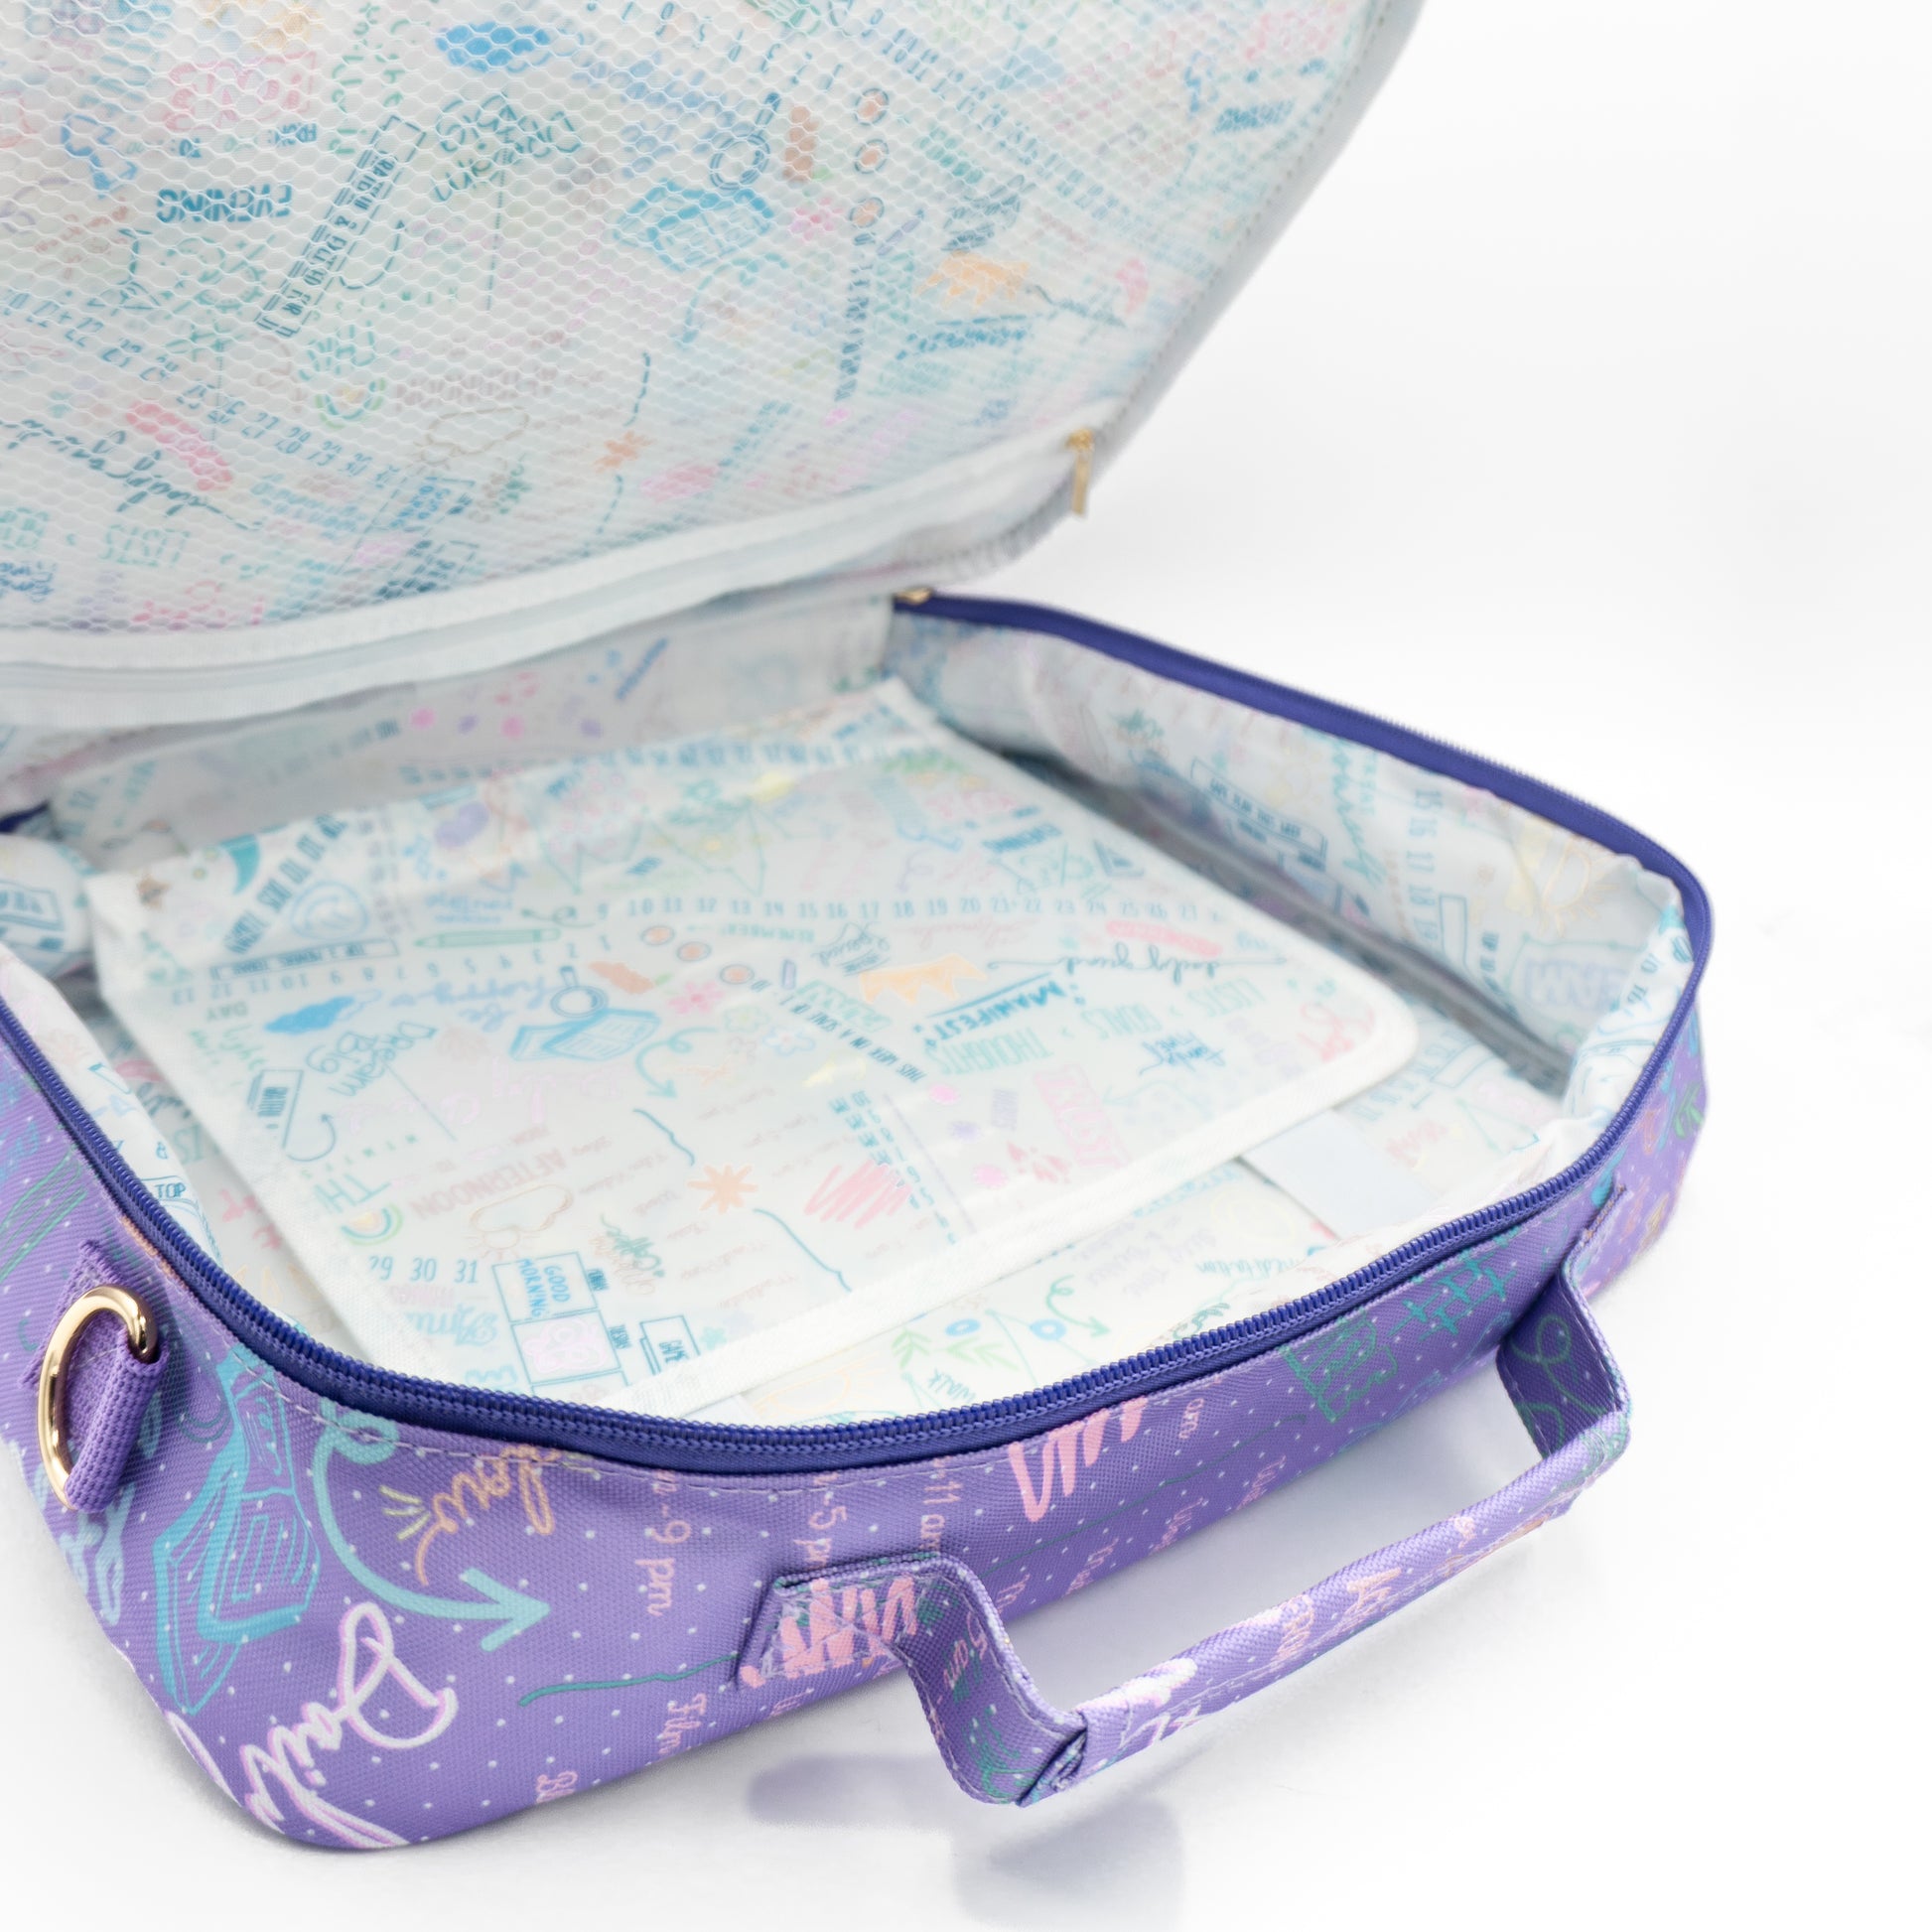 Inside view of purple travel planner case